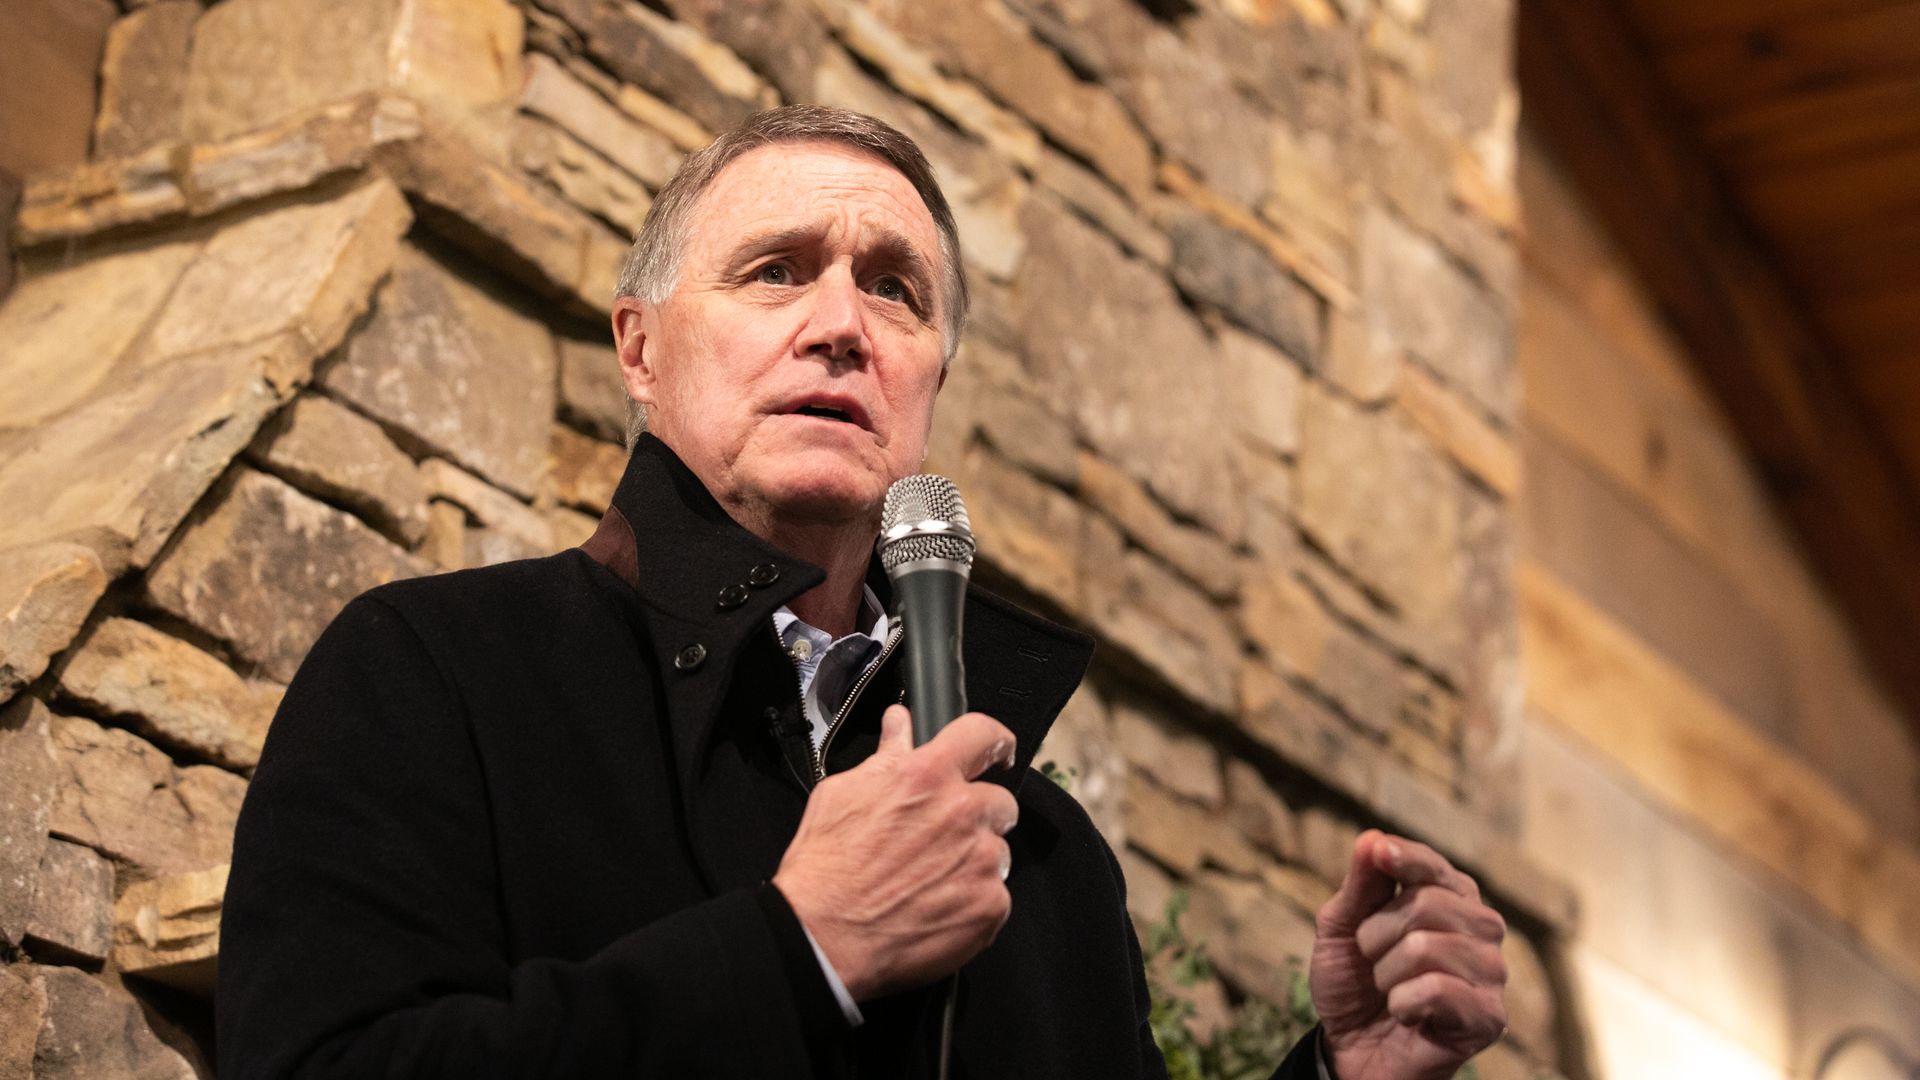 Georgia Republican Senate candidate David Perdue (R-GA) speaks to the crowd during a campaign rally with former U.N. Ambassador Nikki Haley on December 20, 2020.